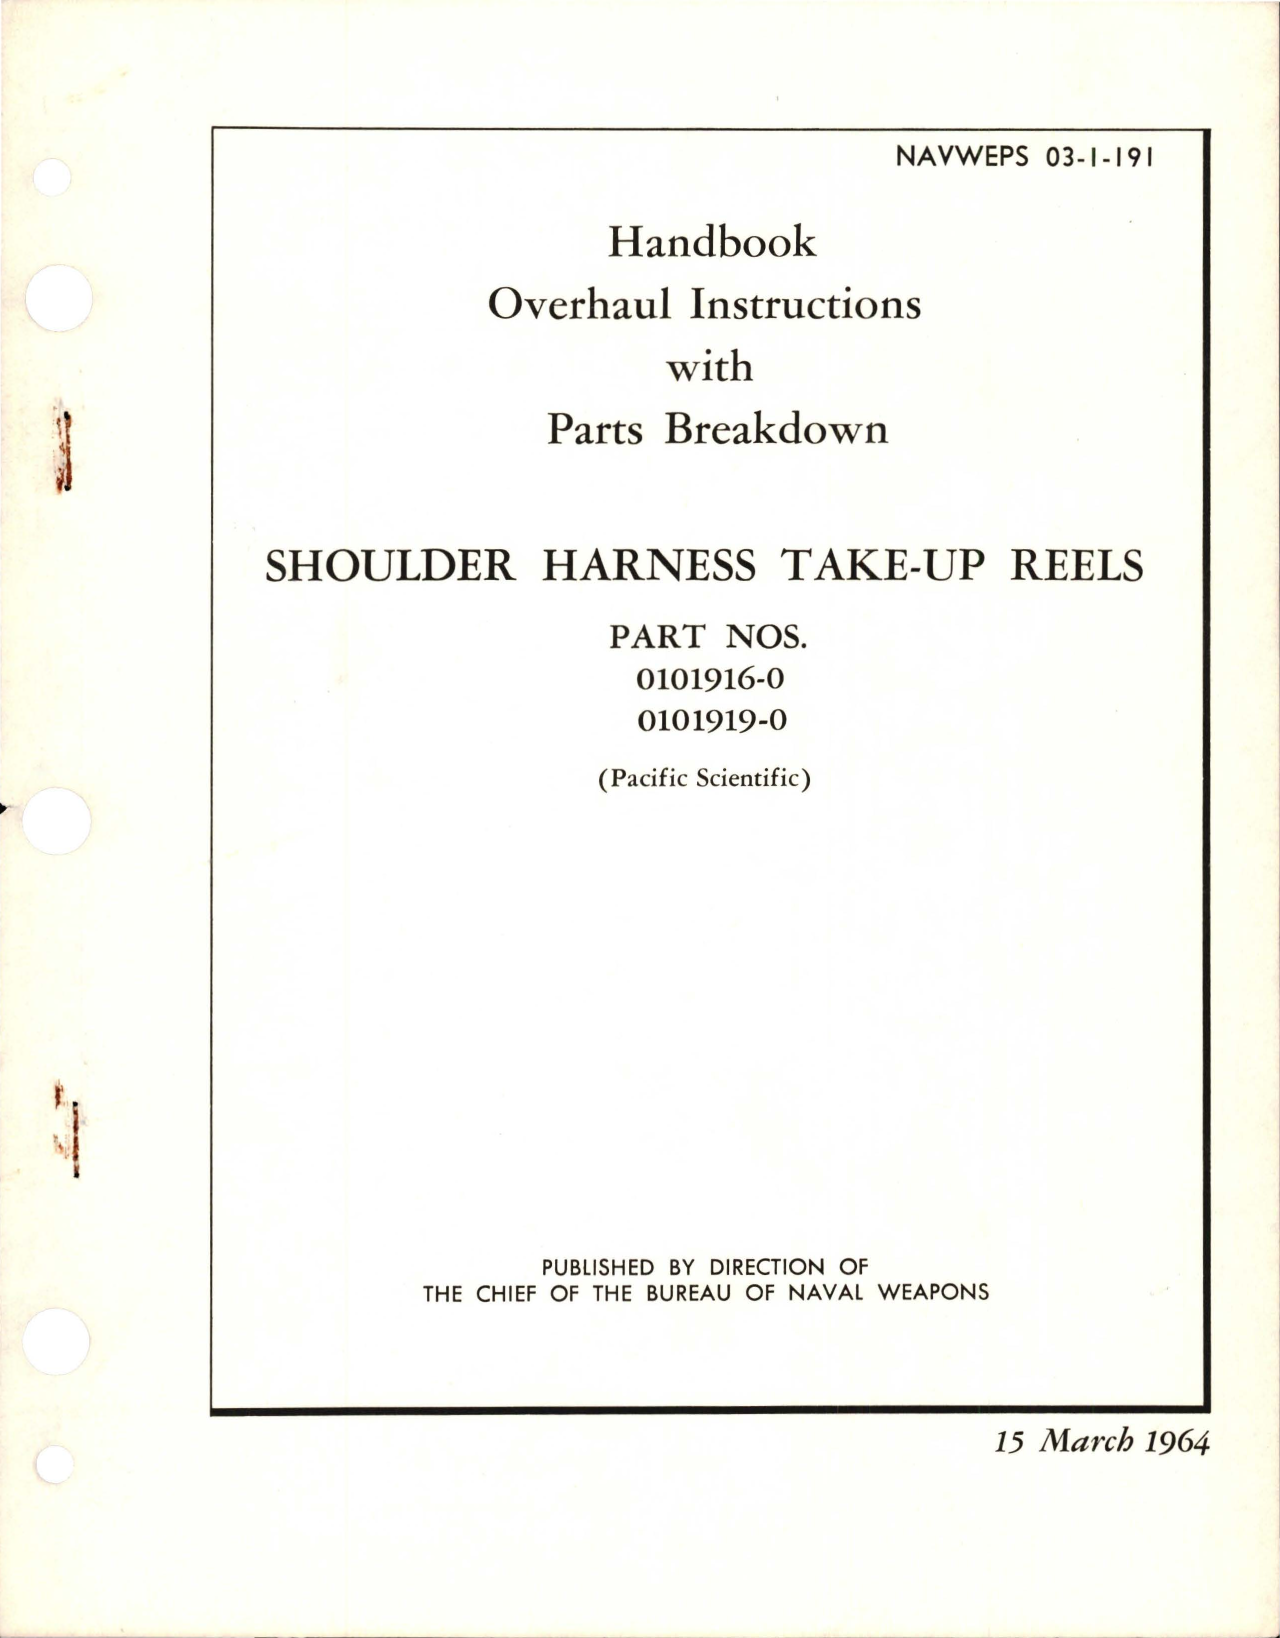 Sample page 1 from AirCorps Library document: Overhaul Instructions with Parts Breakdown for Shoulder Harness Take-Up Reels - Parts 0101916-0 and 0101919-0 